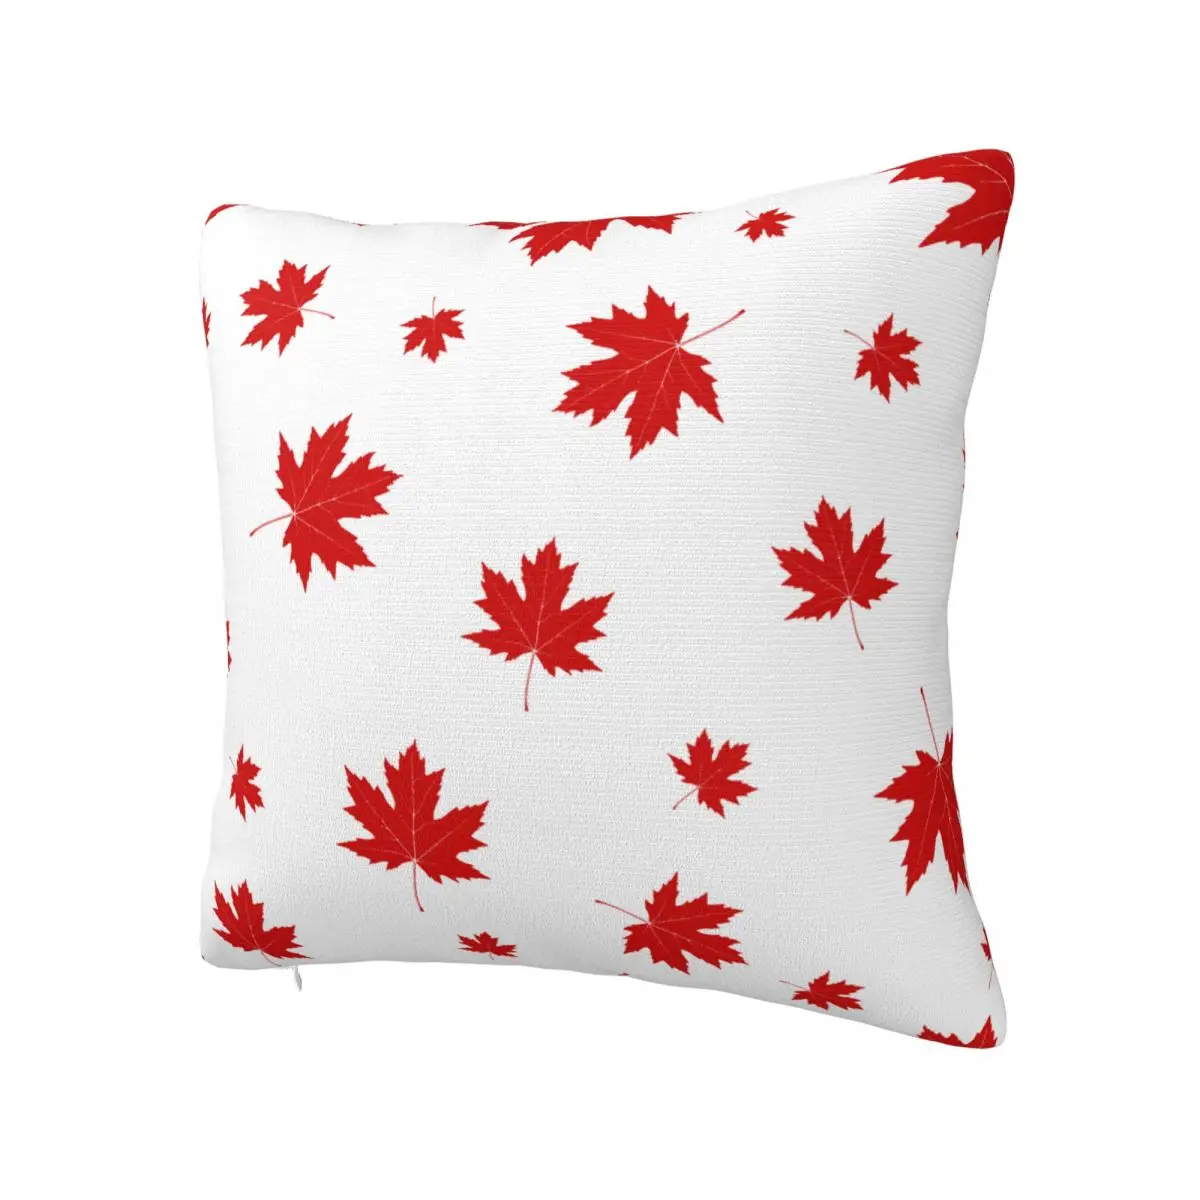 

Red Maple Leaf Autumn Pillowcase Soft Polyester Cushion Cover Decor Throw Pillow Case Cover Home Square 45*45cm